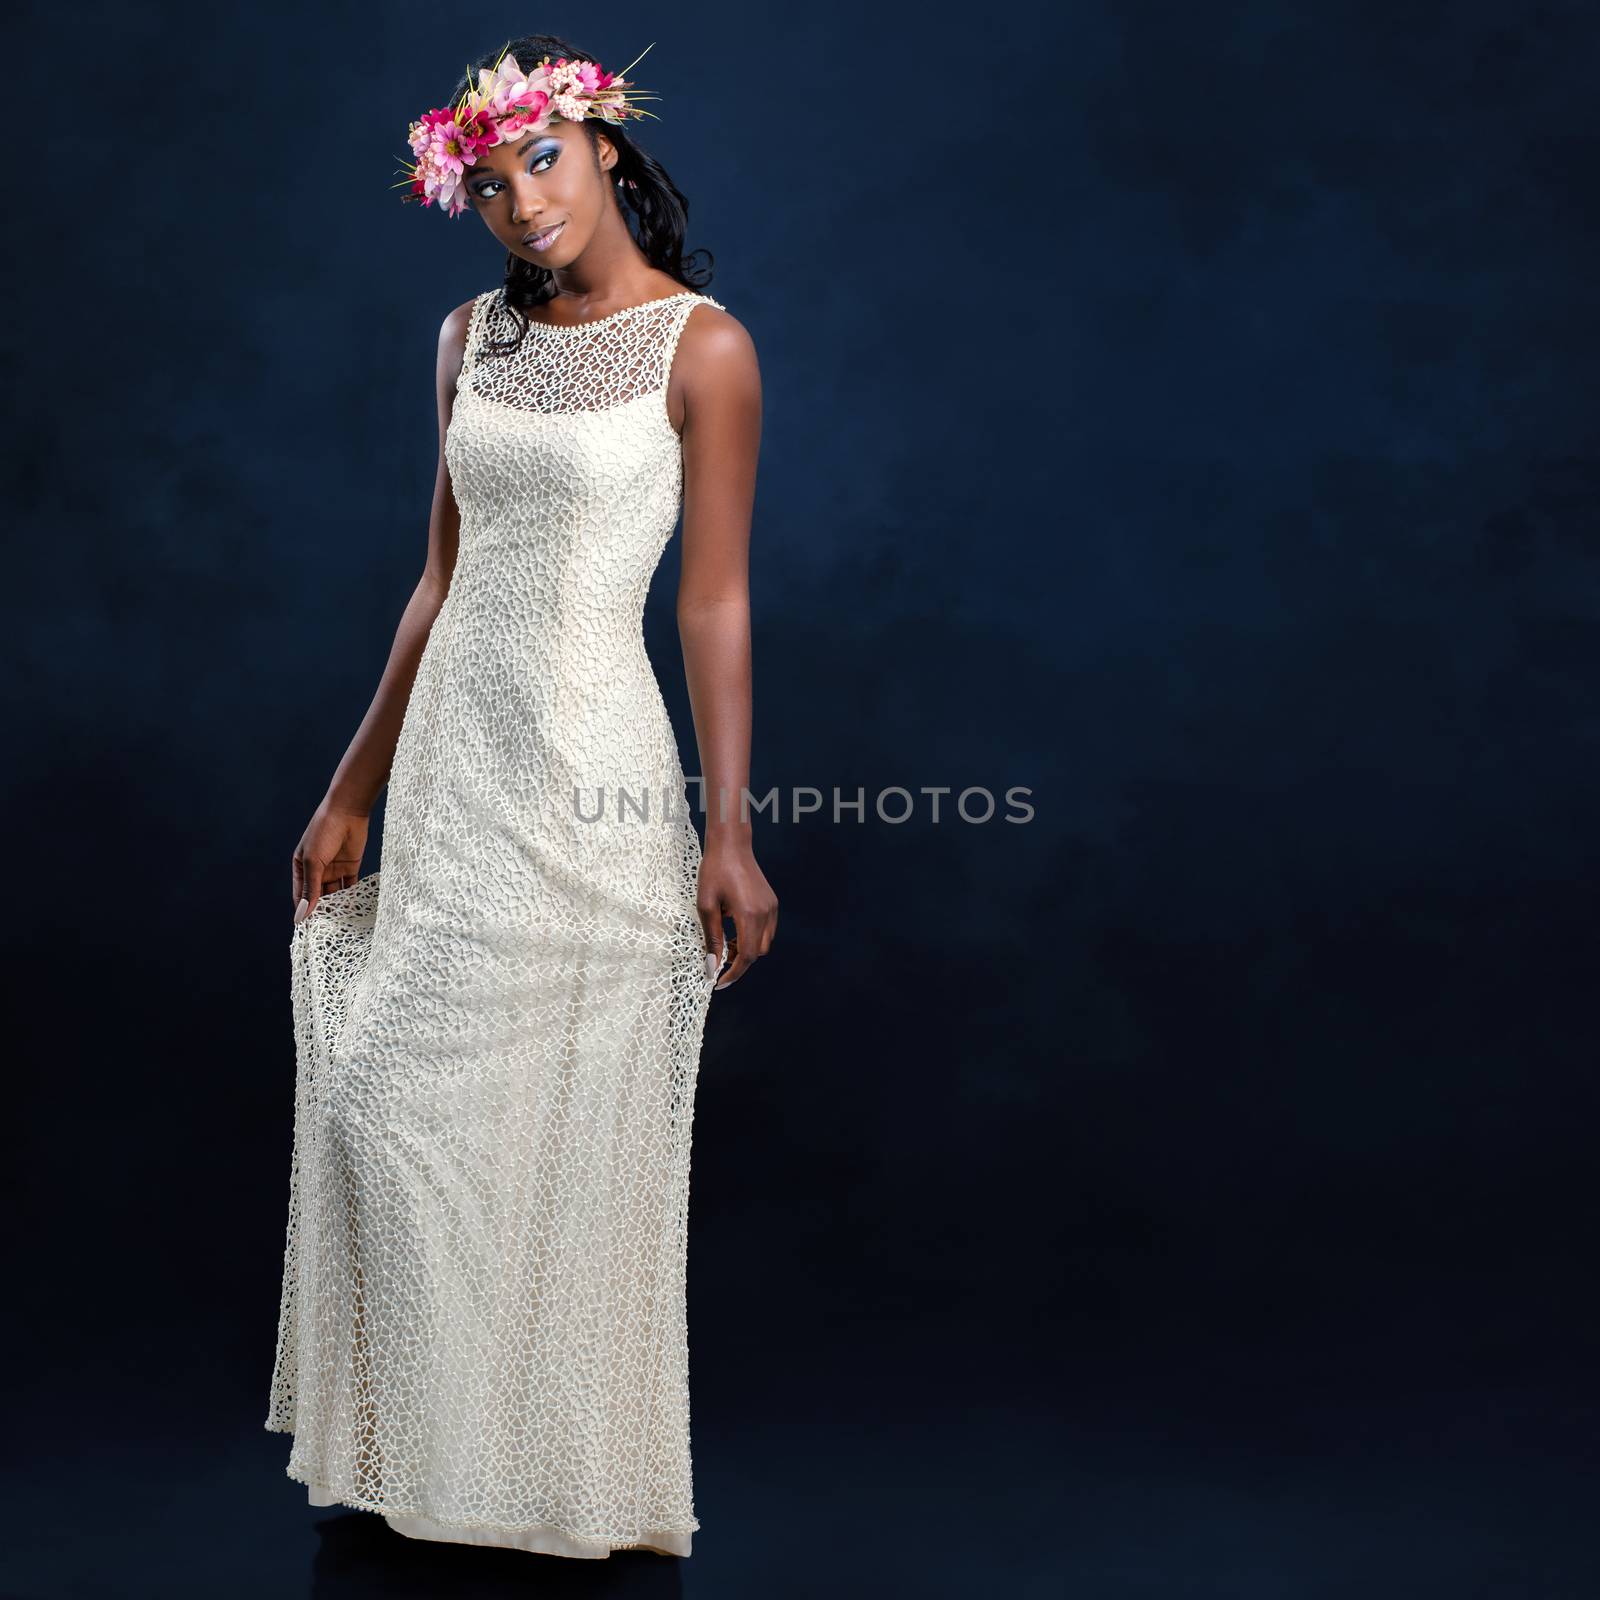 Beautiful young african bride in white wedding dress. by karelnoppe